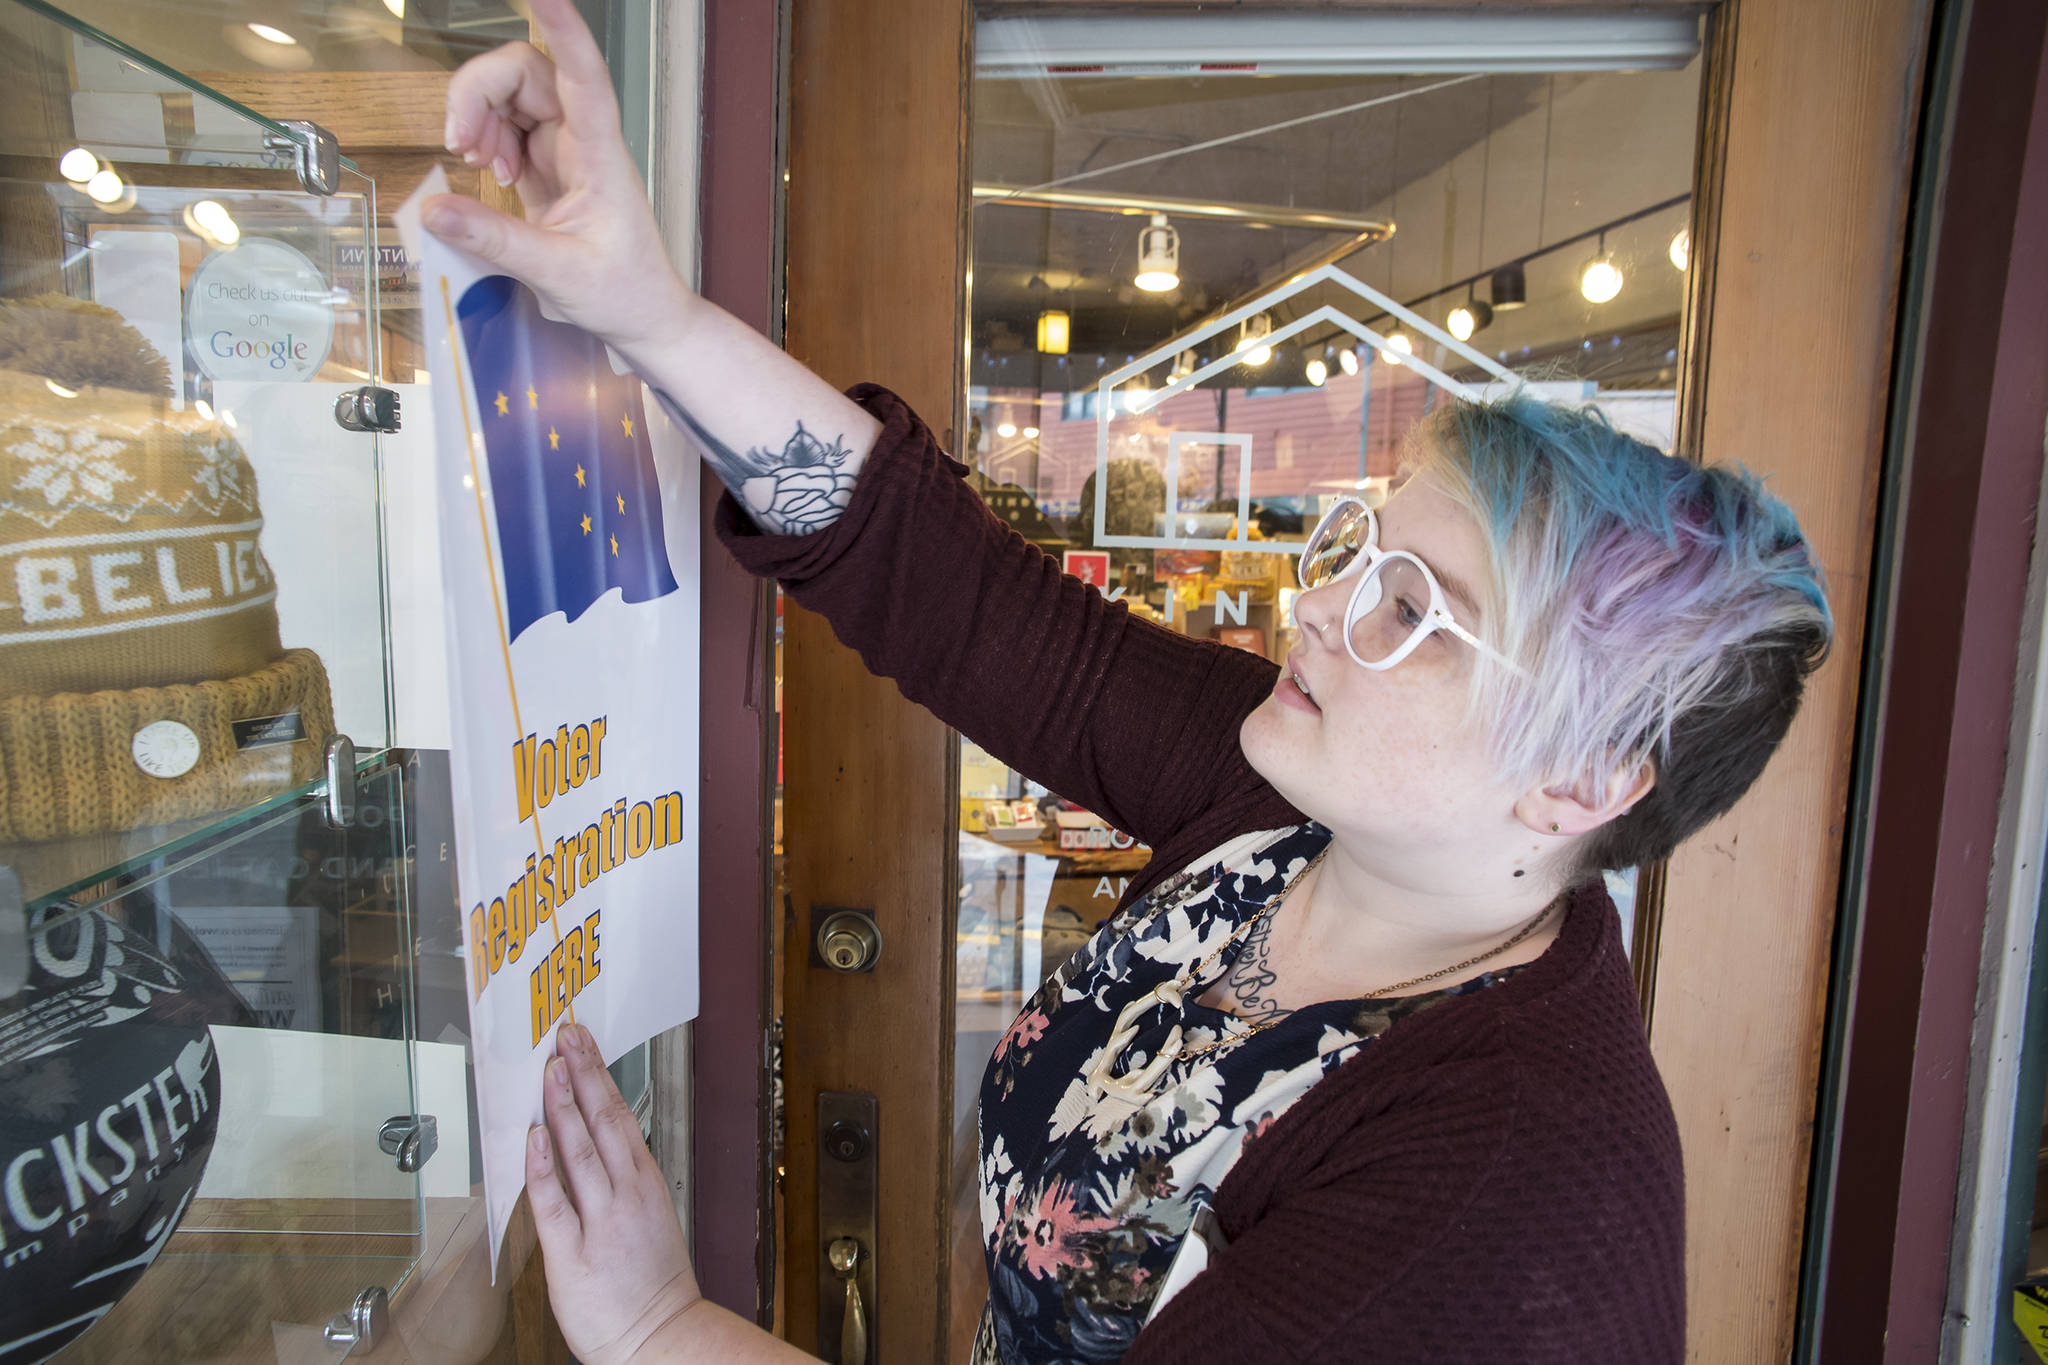 Veronica Buness, of Kindred Post, tapes up a sign on Thursday, Oct. 4, 2018, announcing people can register to vote at the Franklin Street business. (Michael Penn | Juneau Empire)